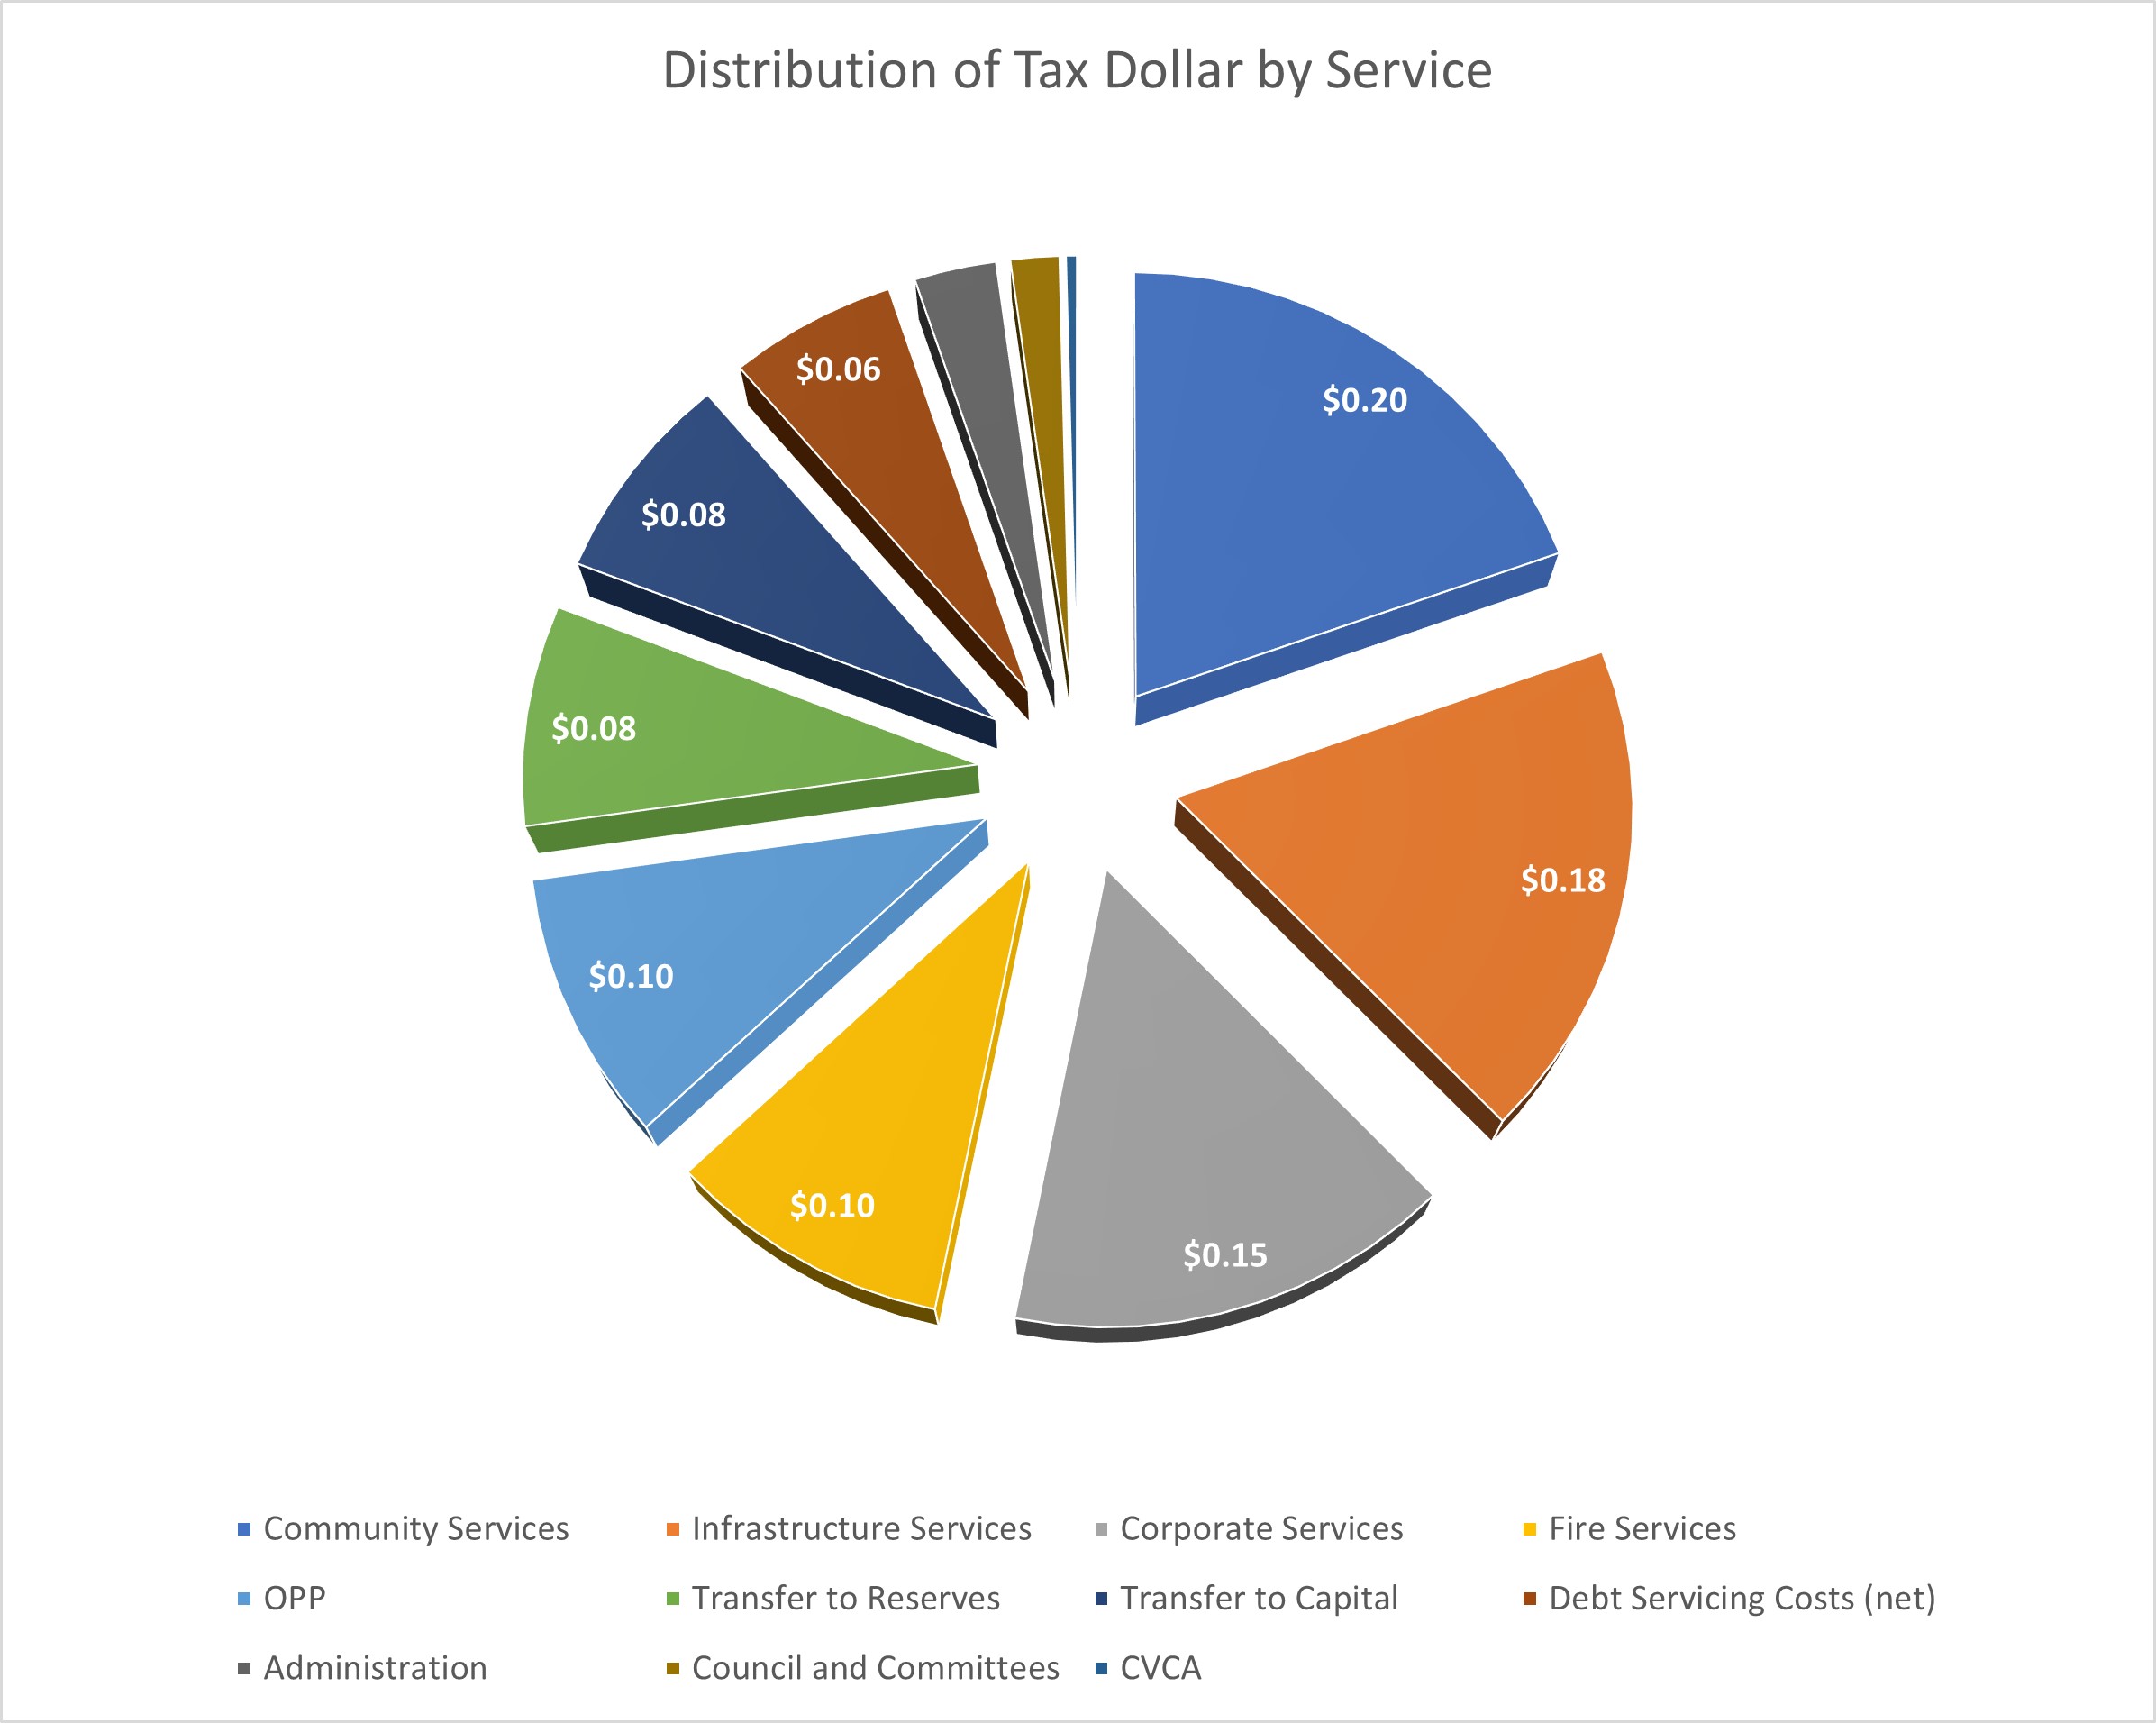 A graph depicting tax dollar distribution by service area. Of every tax dollar: $0.20 goes to Community Services, $0.18 to Infrastructure Services, $0.15 to Corporate Services, $0.10 to Fire Services, $0.10 to OPP, $0.08 transferred to reserves, $0.08 transferred to Capital budget, $0.06 to Debt Servicing Costs. The remaining $0.05 is split between Administration, Council and Committees, and the CVCA.